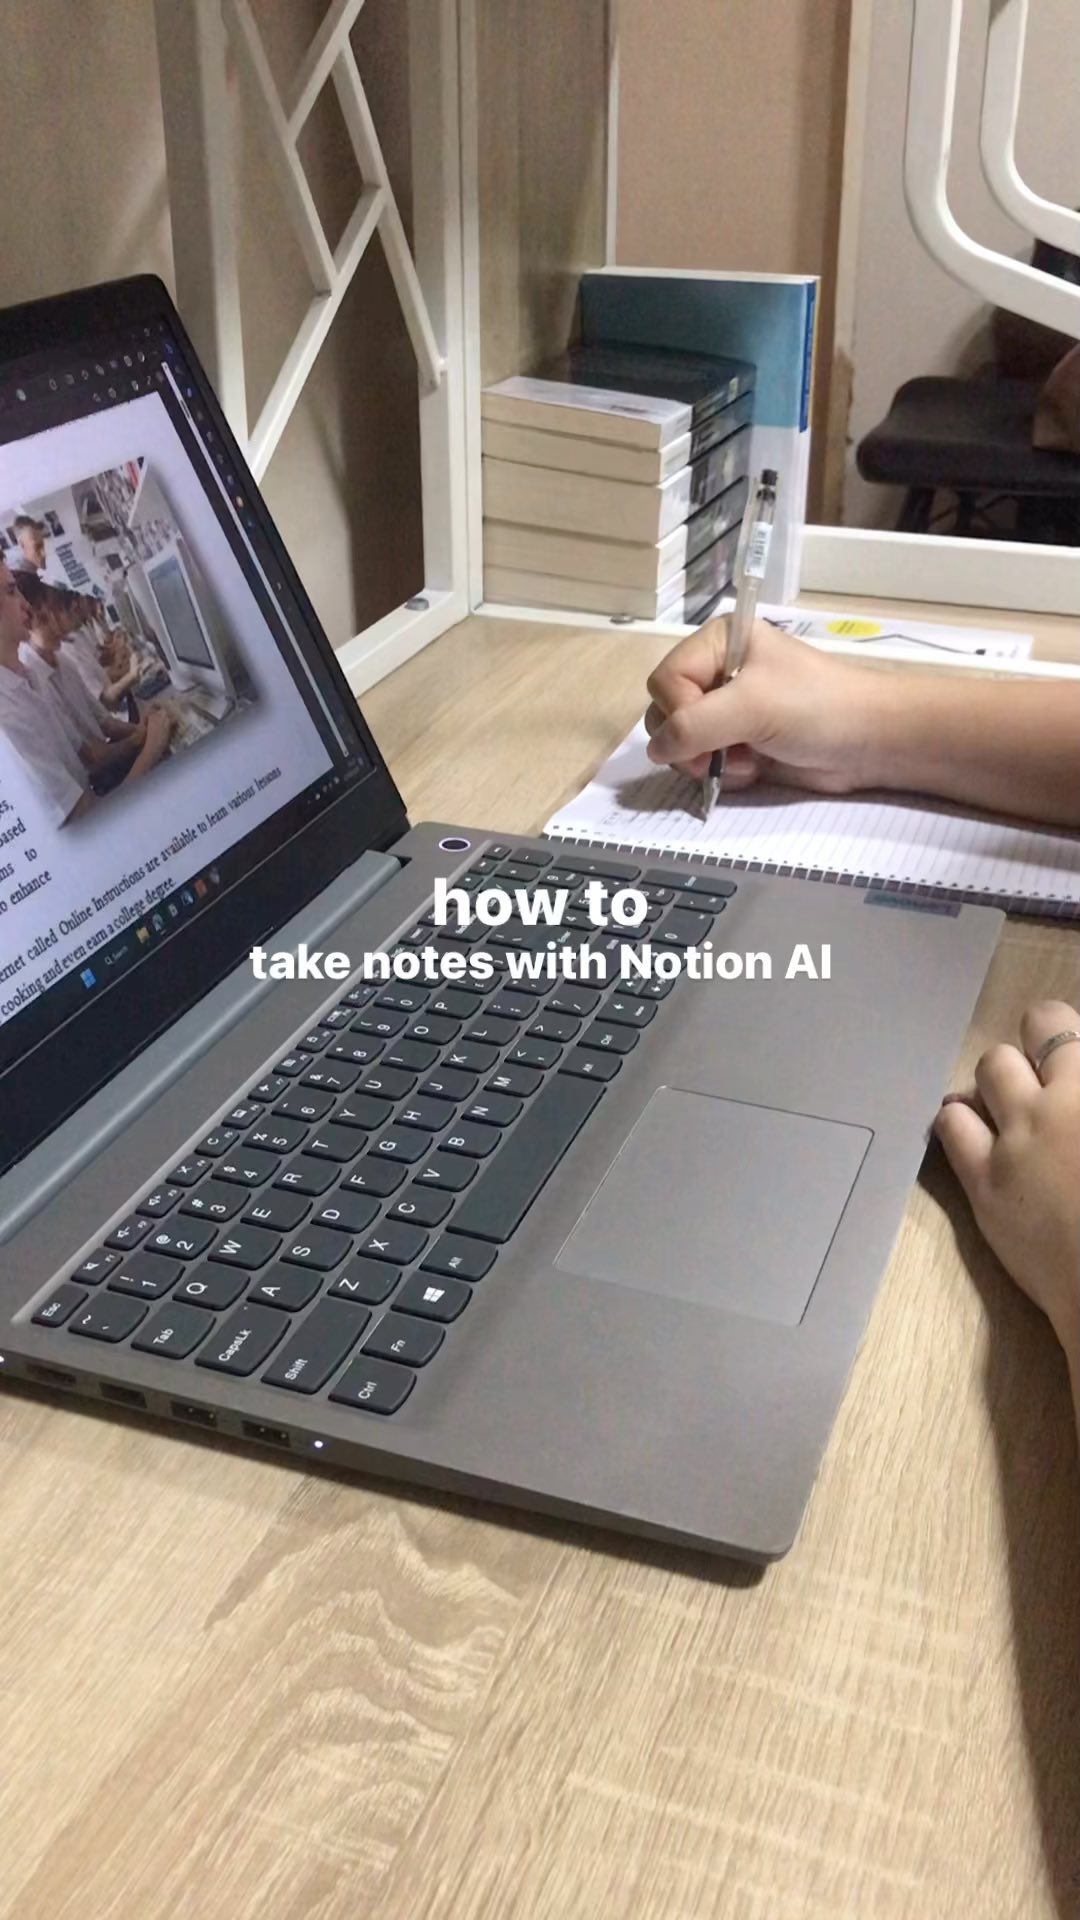 Note taking has just made easy using Notion AI. You can you this with any AI but I’m using Notion AI since Notion itself